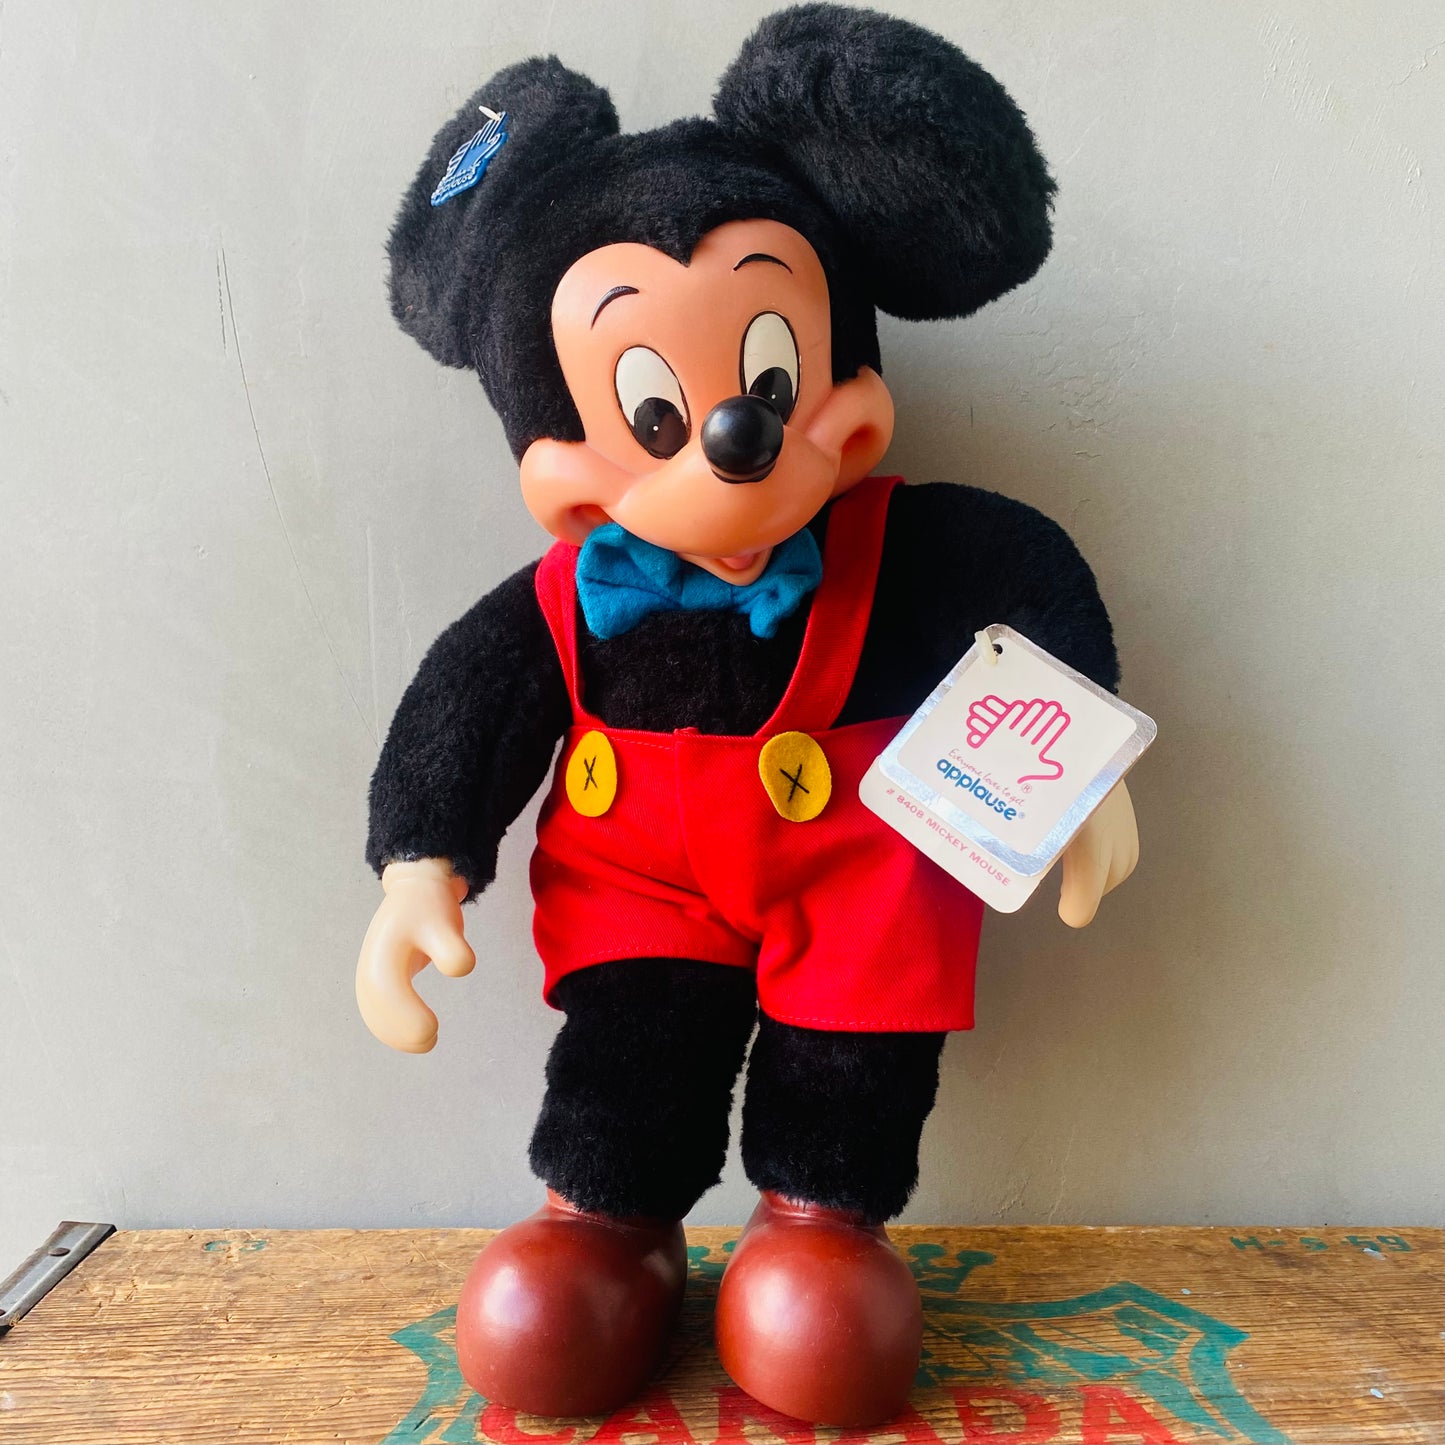 【1981 vintage】applause mickey mouse doll